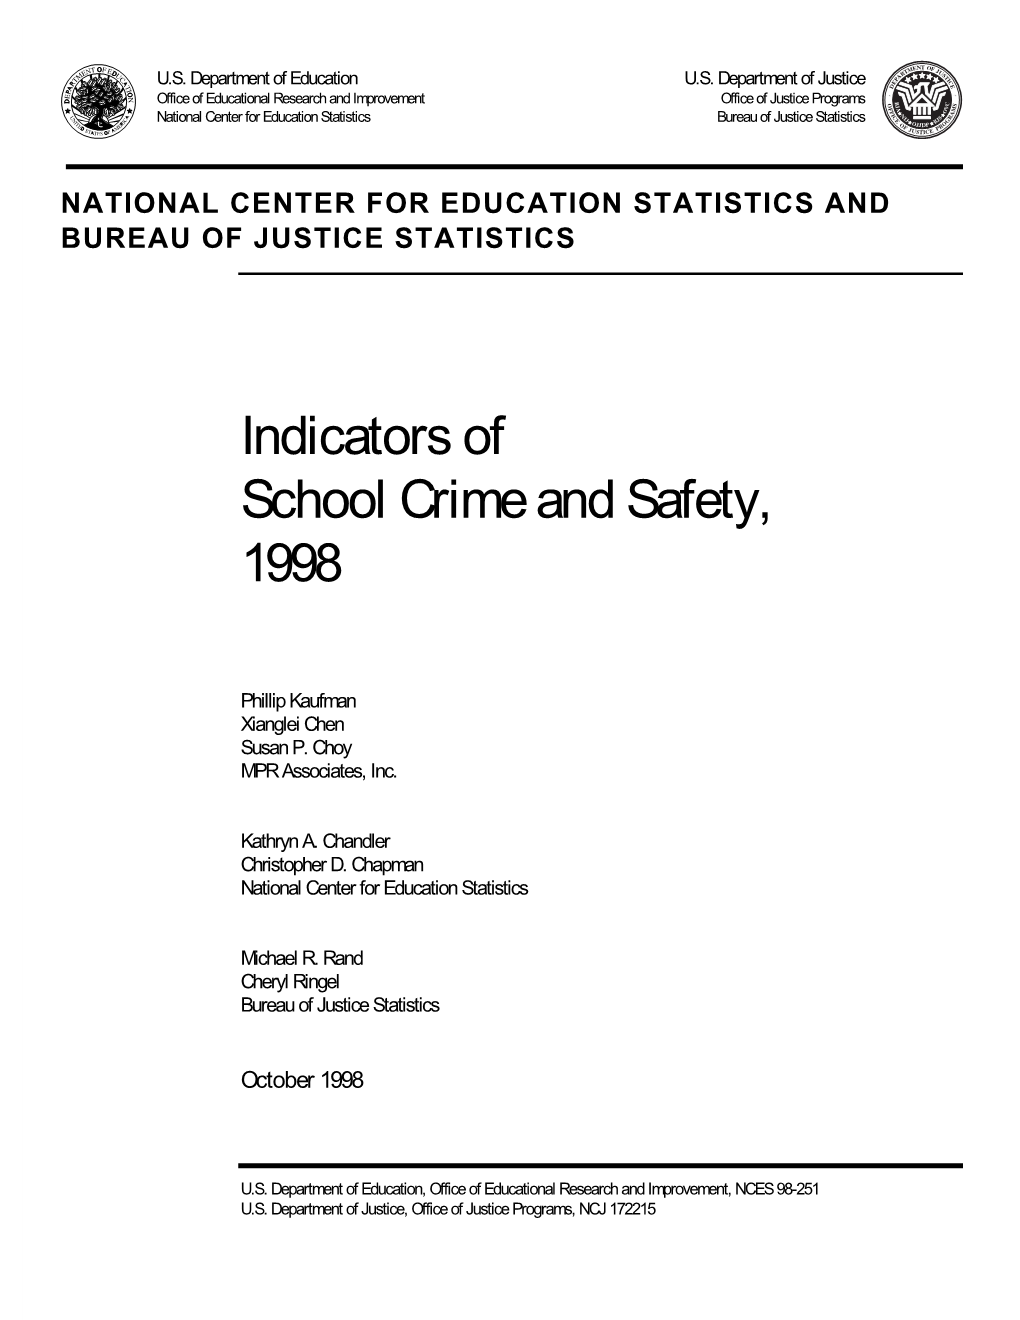 Indicators of Shool Crime and Safety, 1998